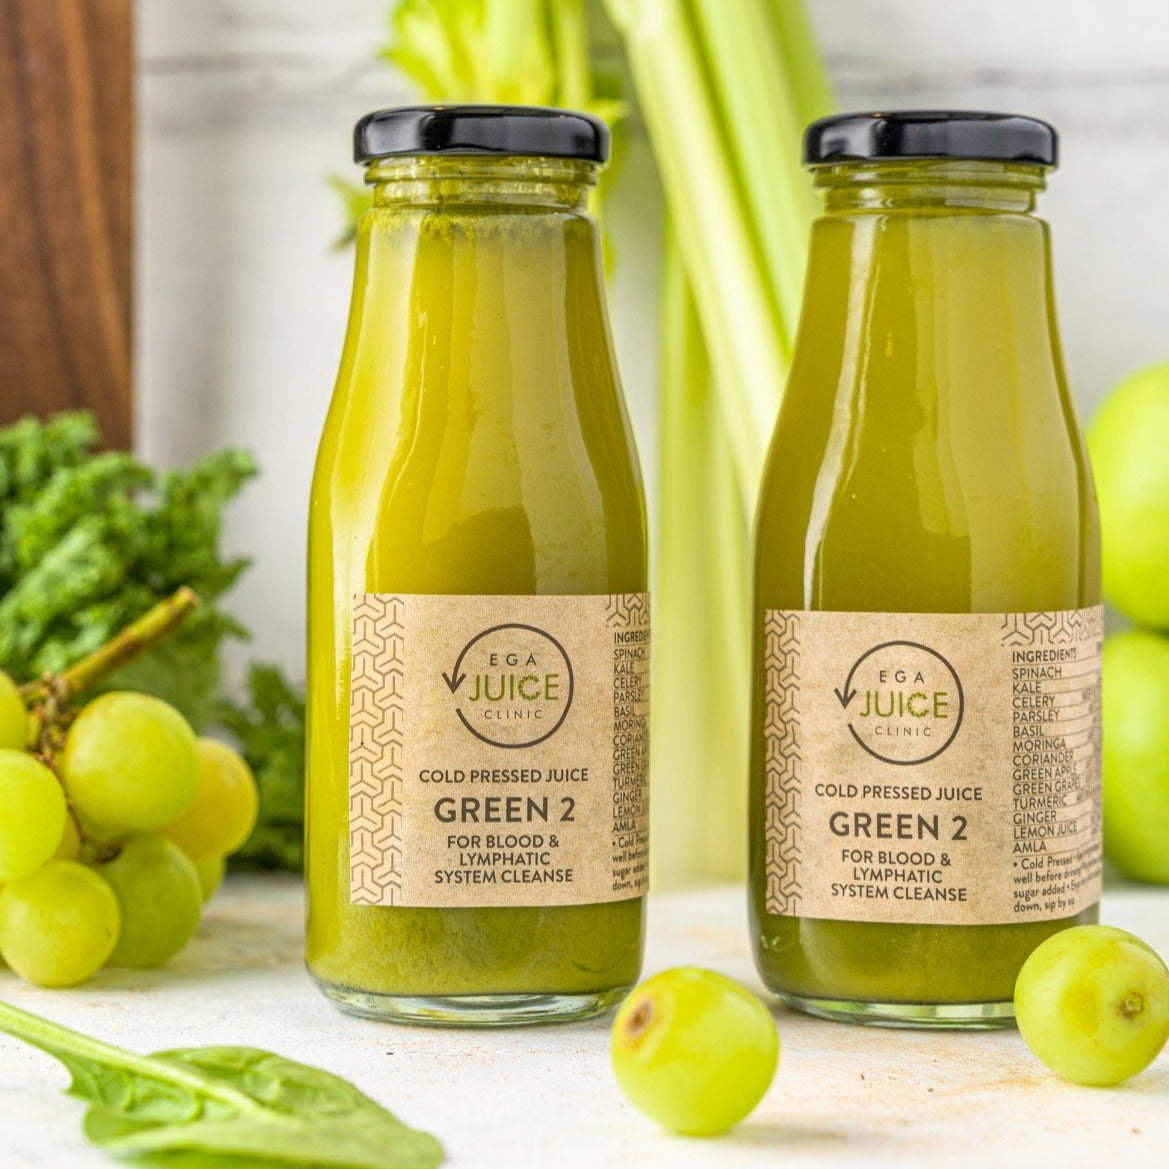 Green 2 Juice - for blood & lymphatic system cleanse